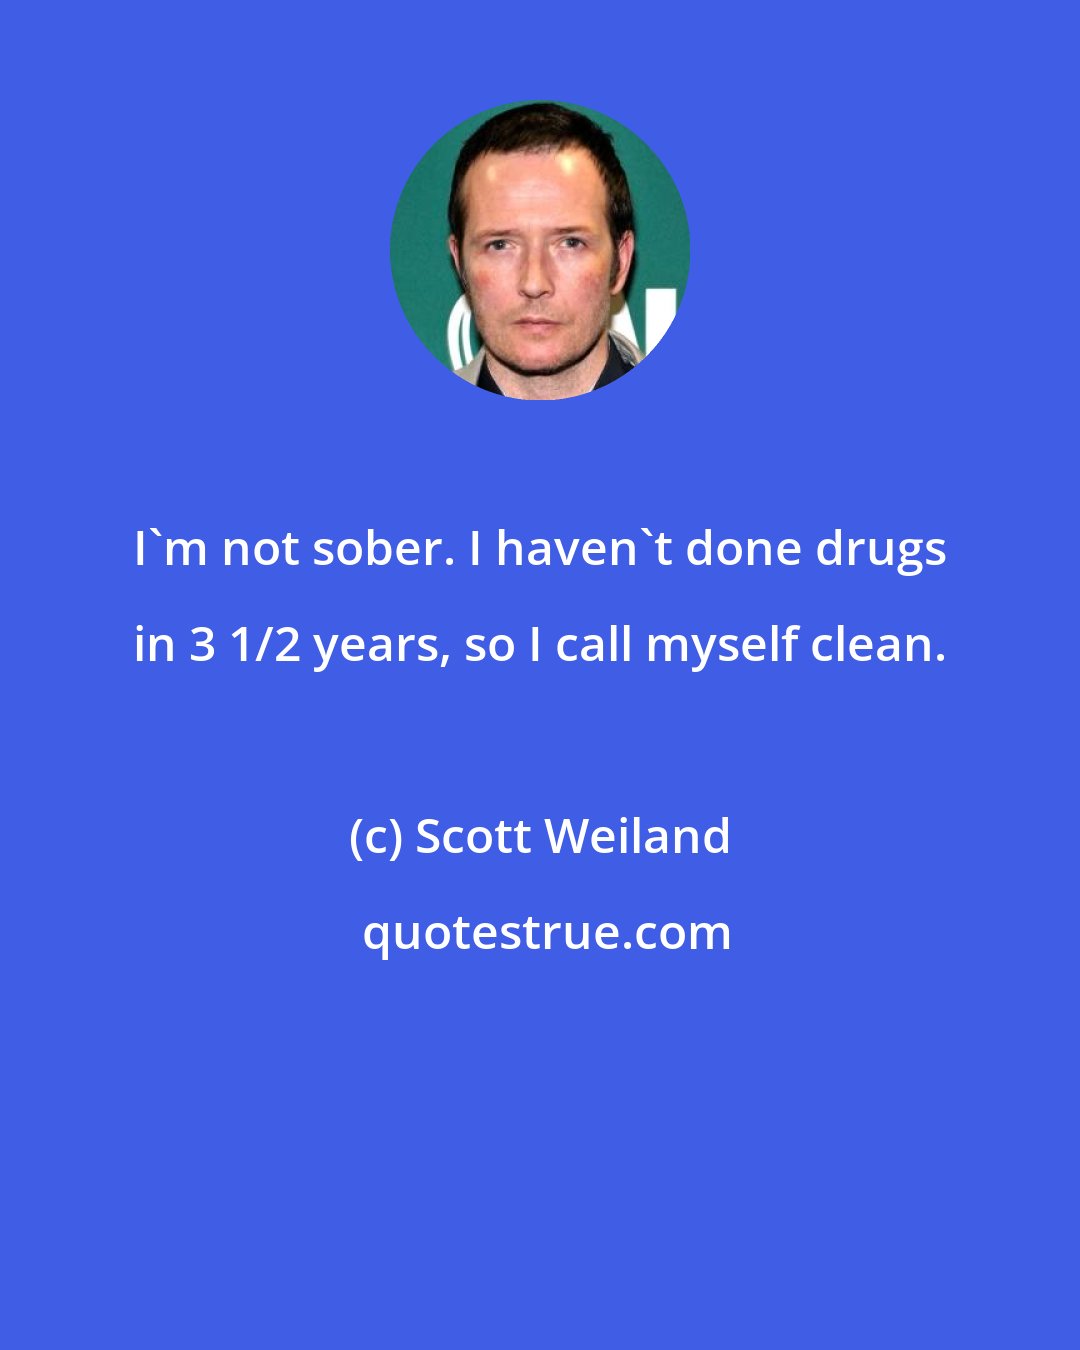 Scott Weiland: I'm not sober. I haven't done drugs in 3 1/2 years, so I call myself clean.